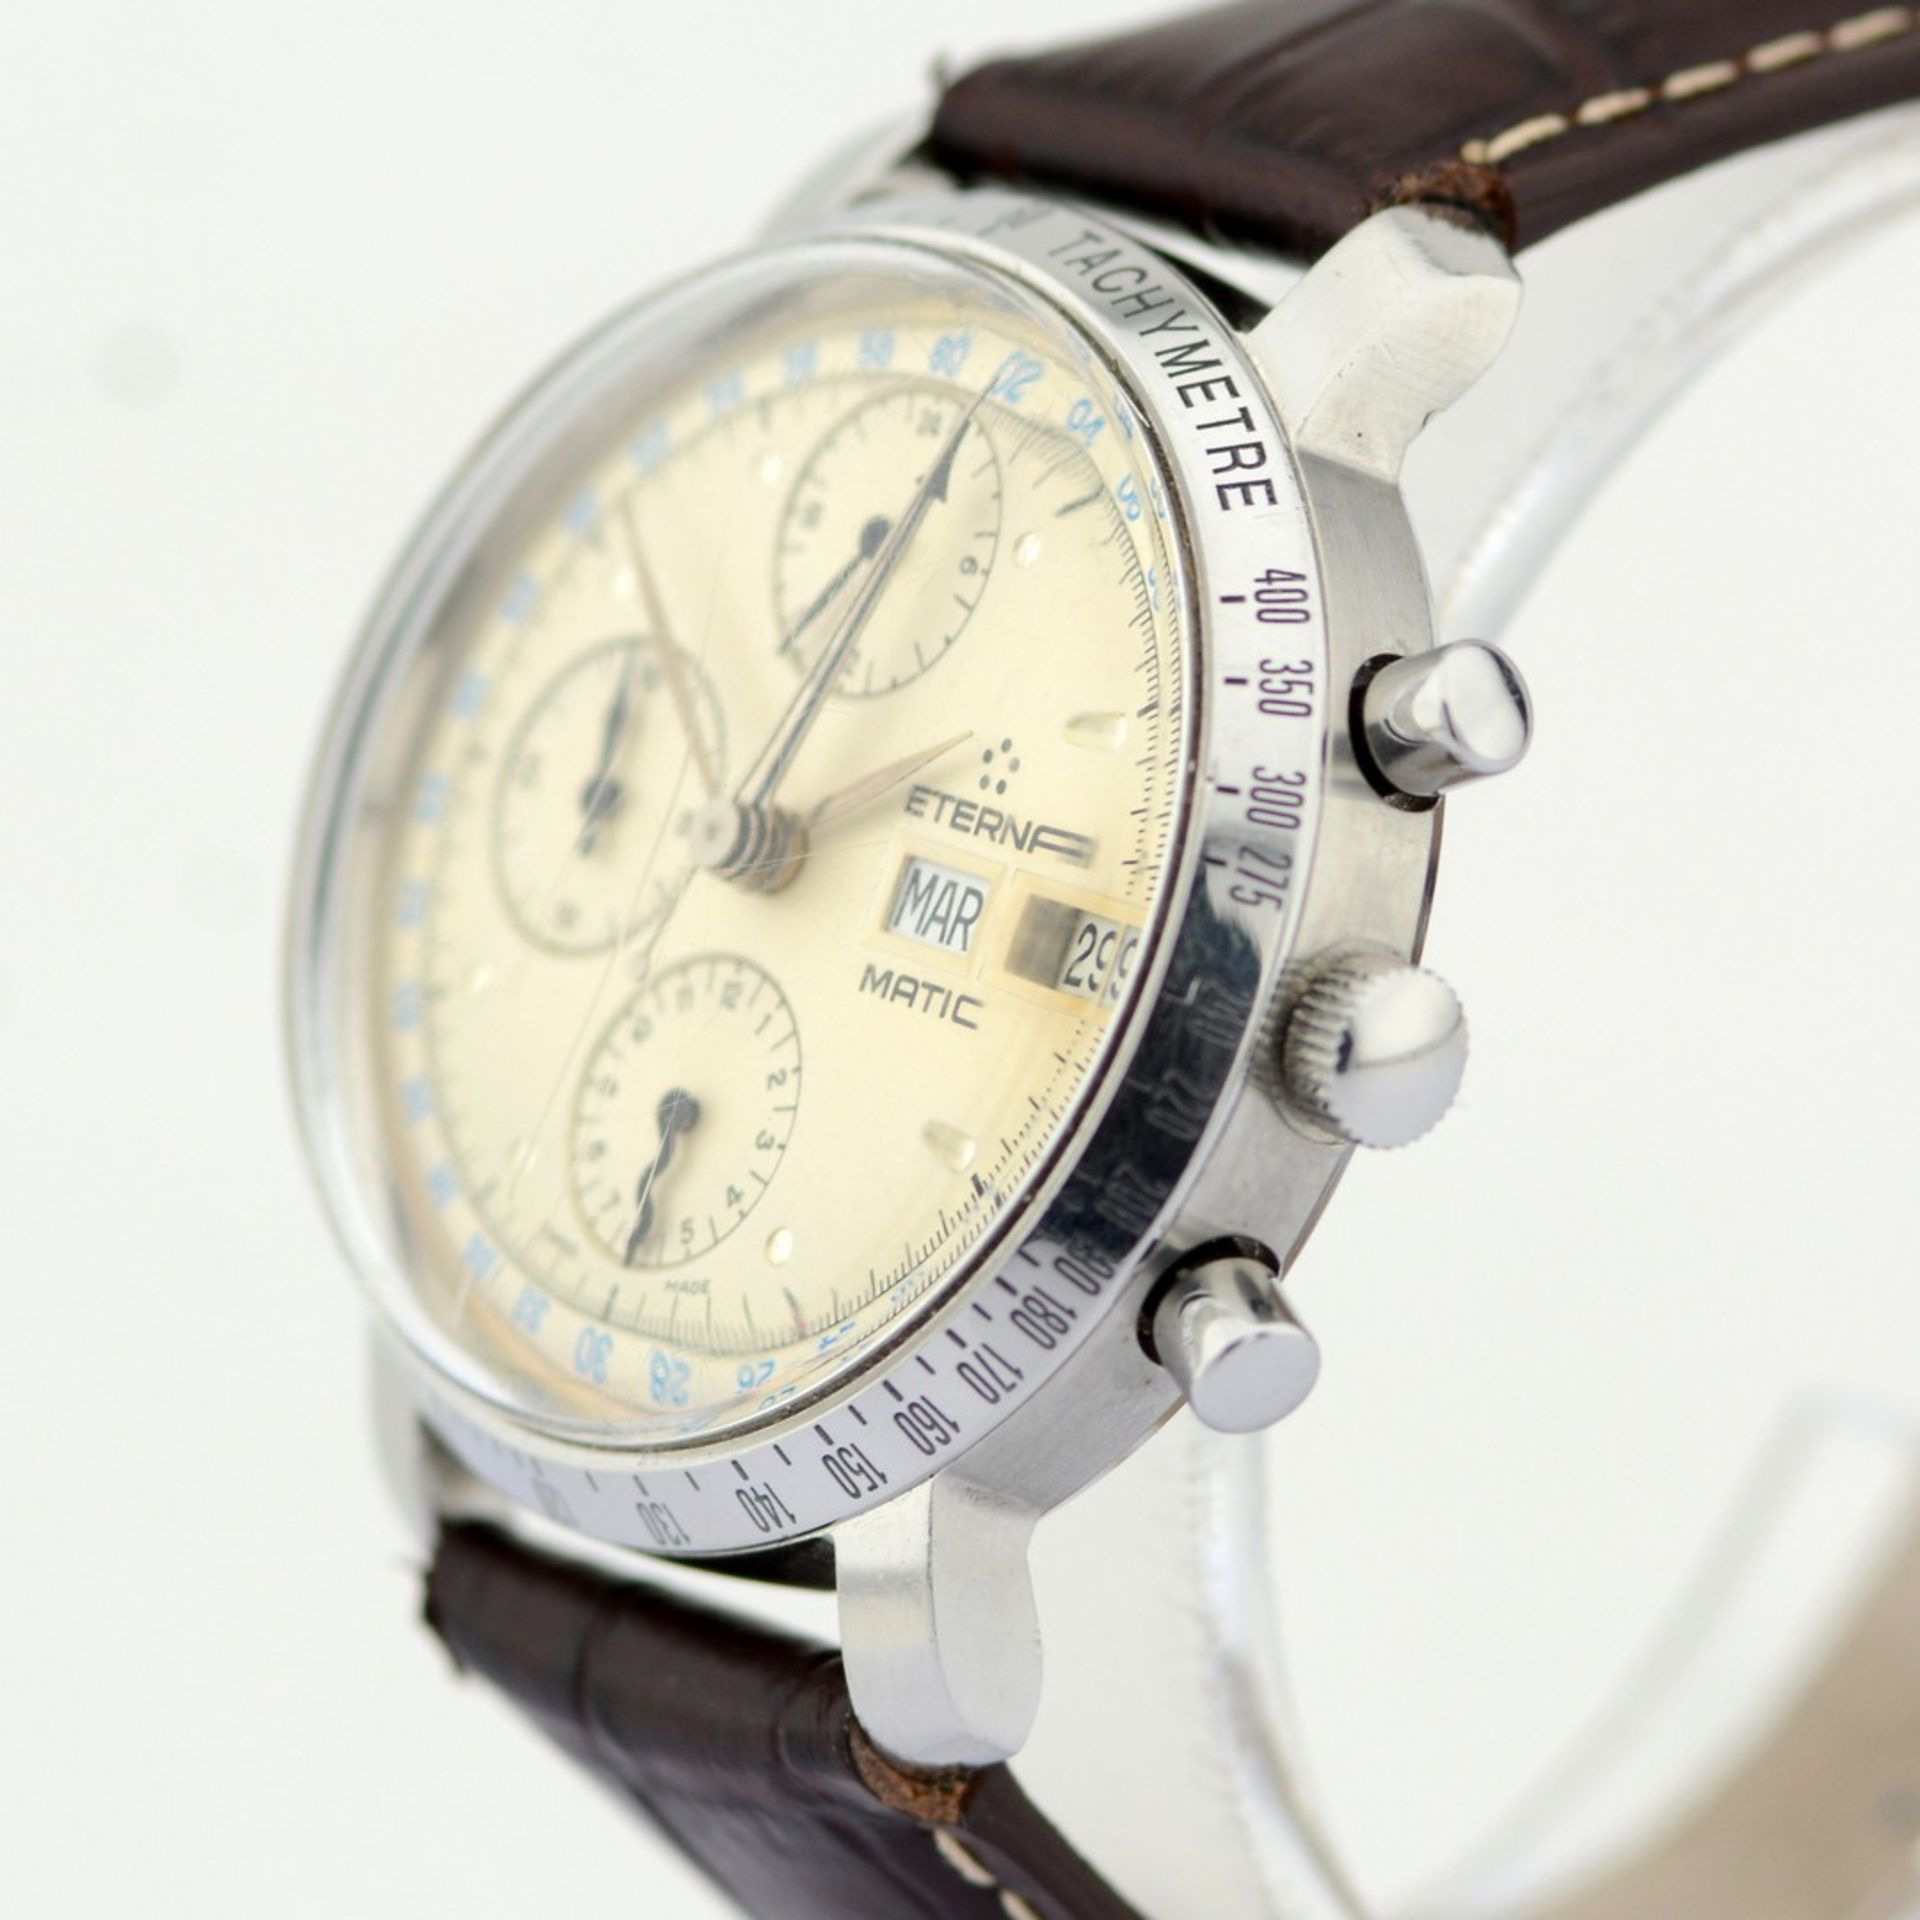 Eterna-Matic / Vintage Chronograph Automatic Day - Date - Gentlemen's Steel Wristwatch - Image 2 of 10